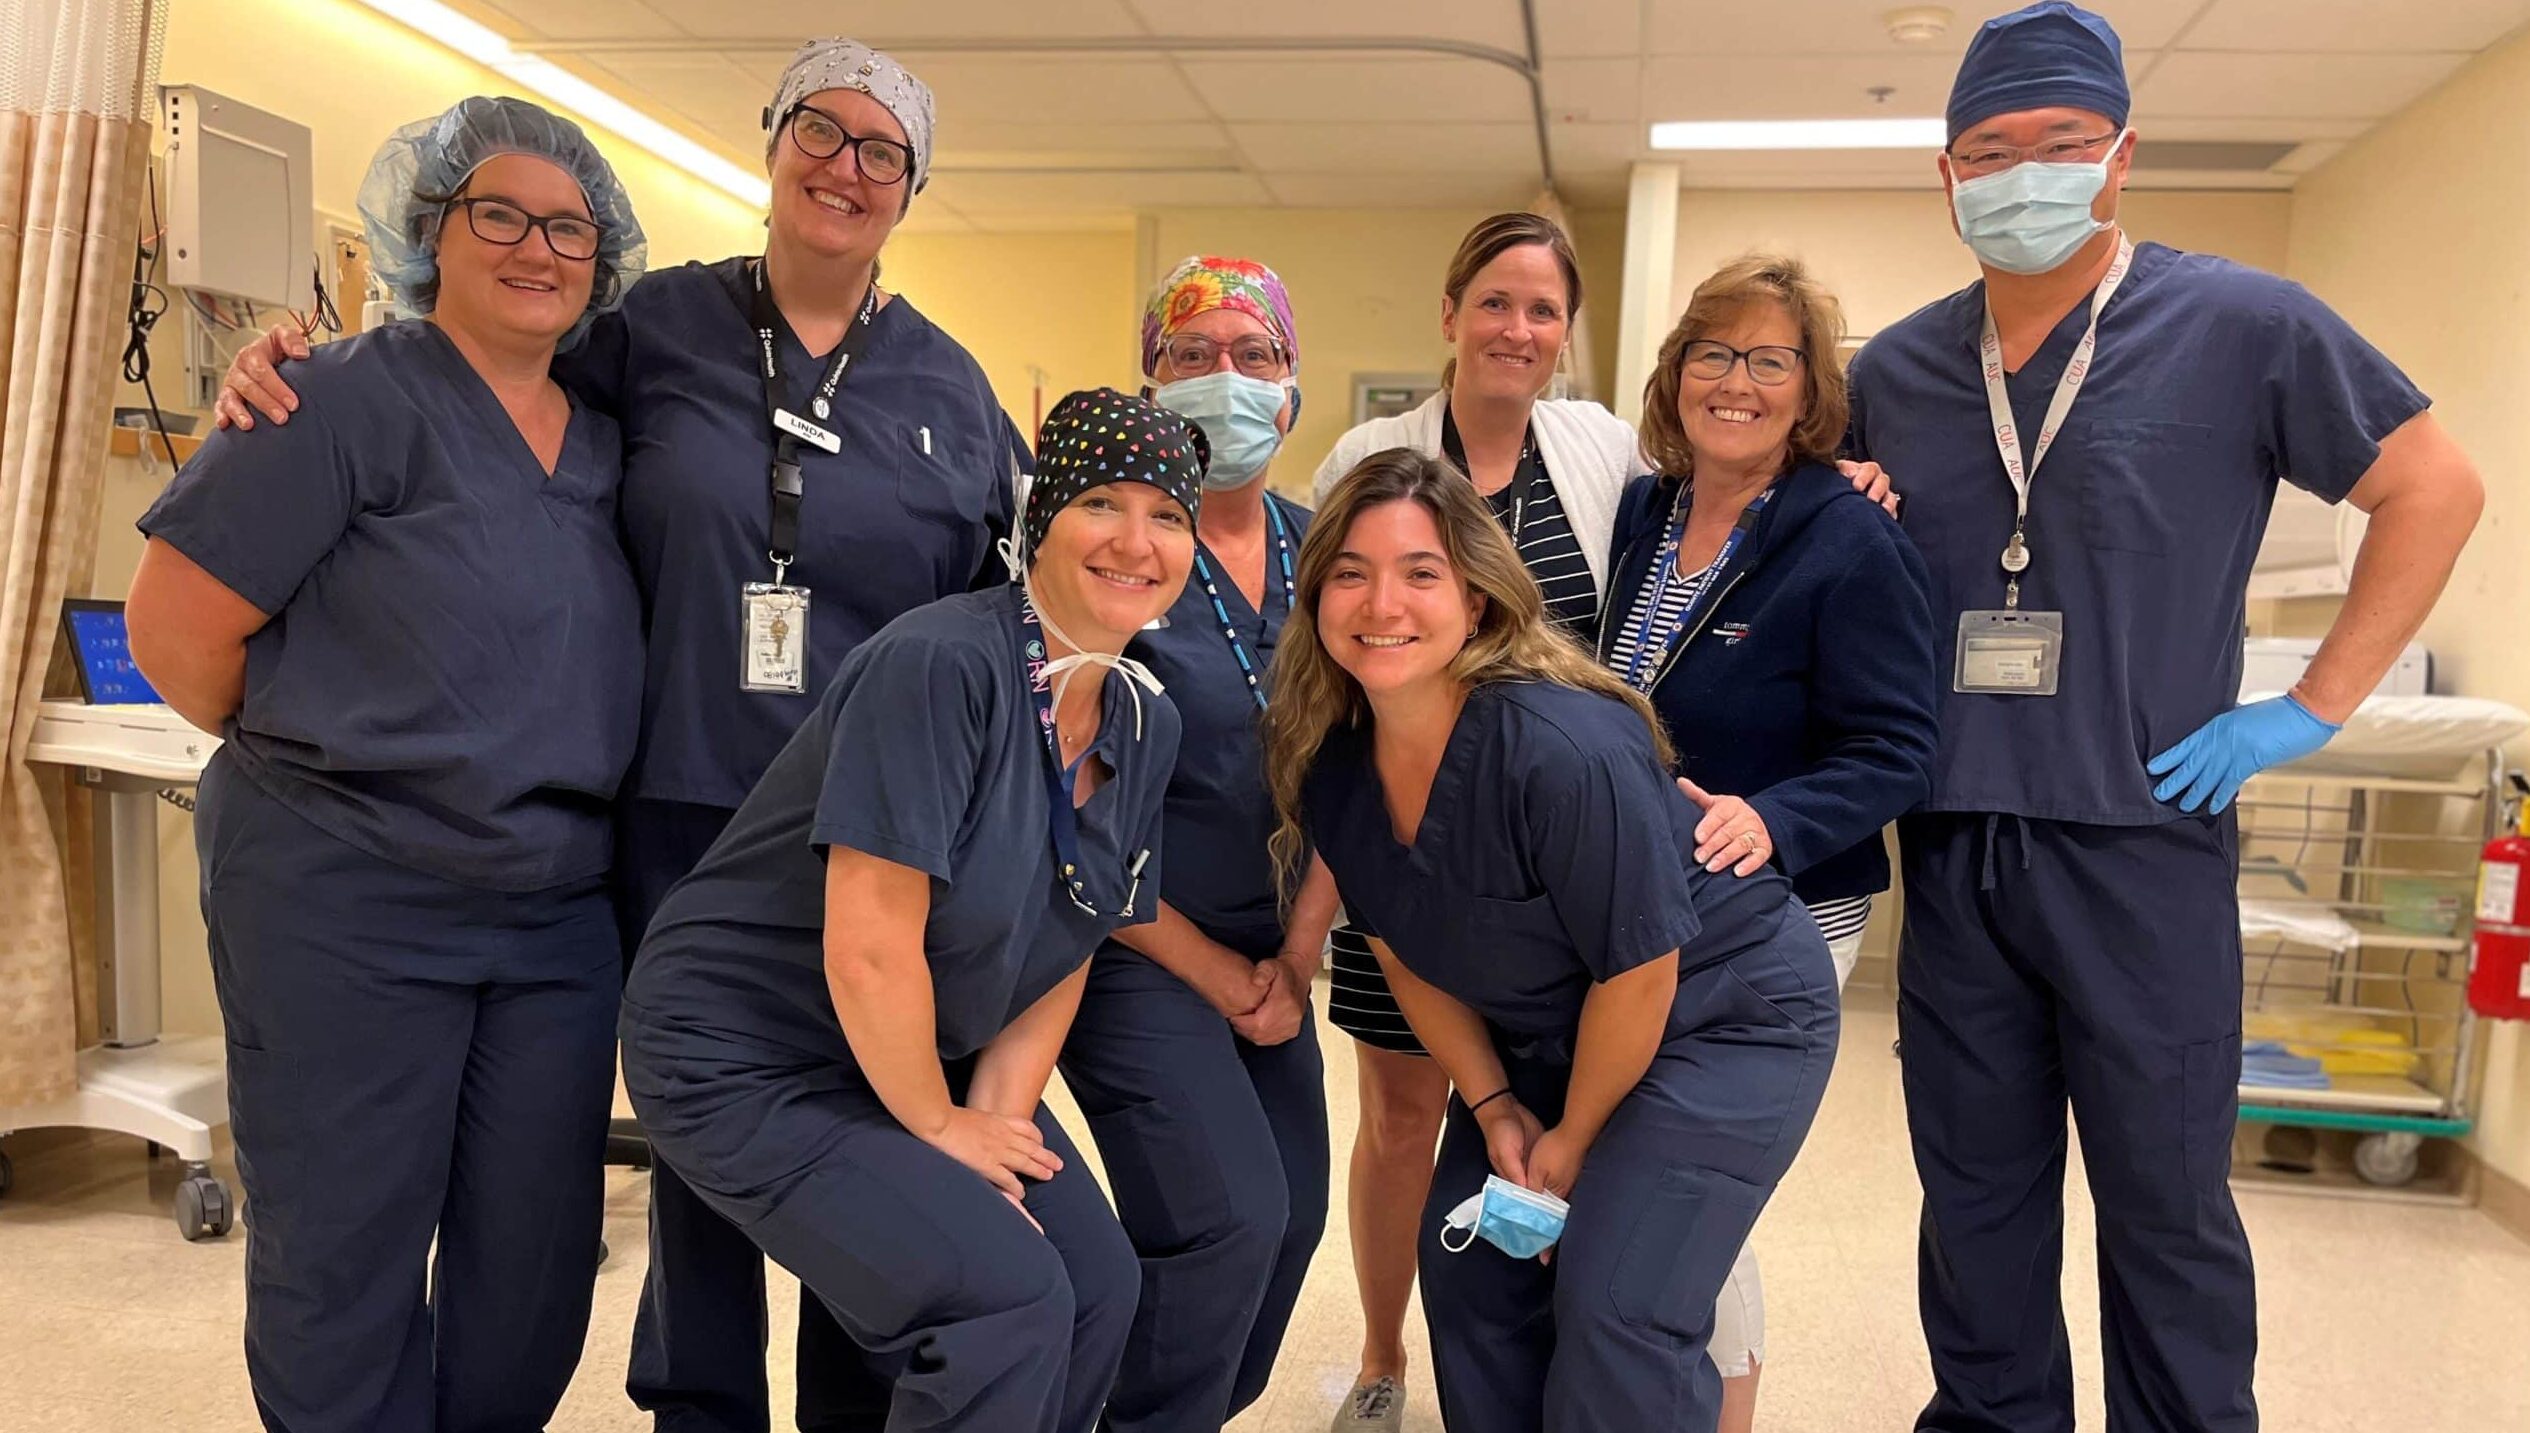 A group of eight smiling hospital workers gather together in a surgery recovery room.